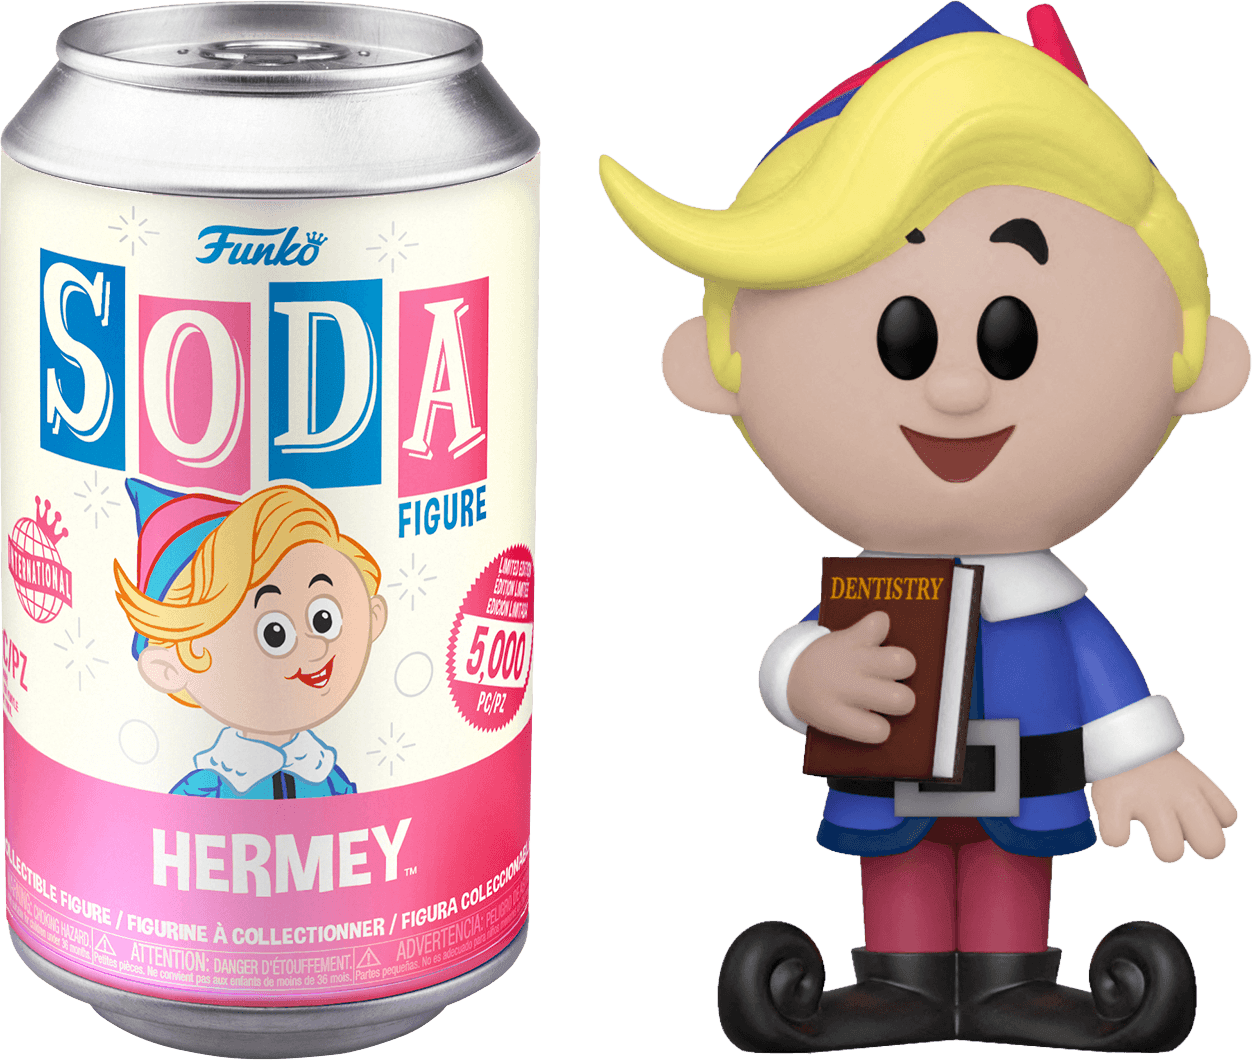 FUN58717 Rudolph the Red-Nosed Reindeer - Hermey (with chase) Vinyl Soda - Funko - Titan Pop Culture